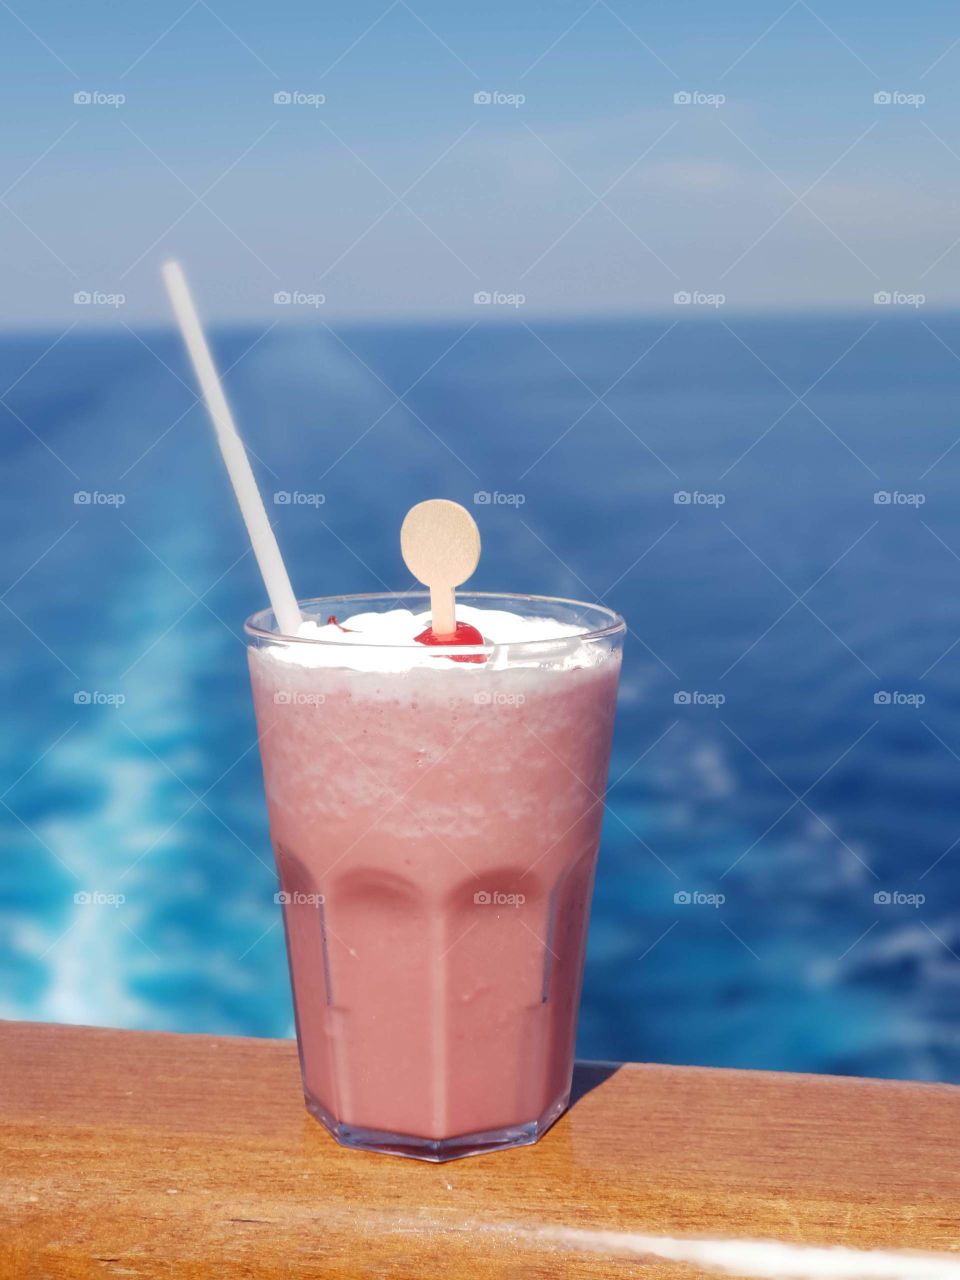 Fruit smoothie in a glass on deck of A cruise ship  g.l